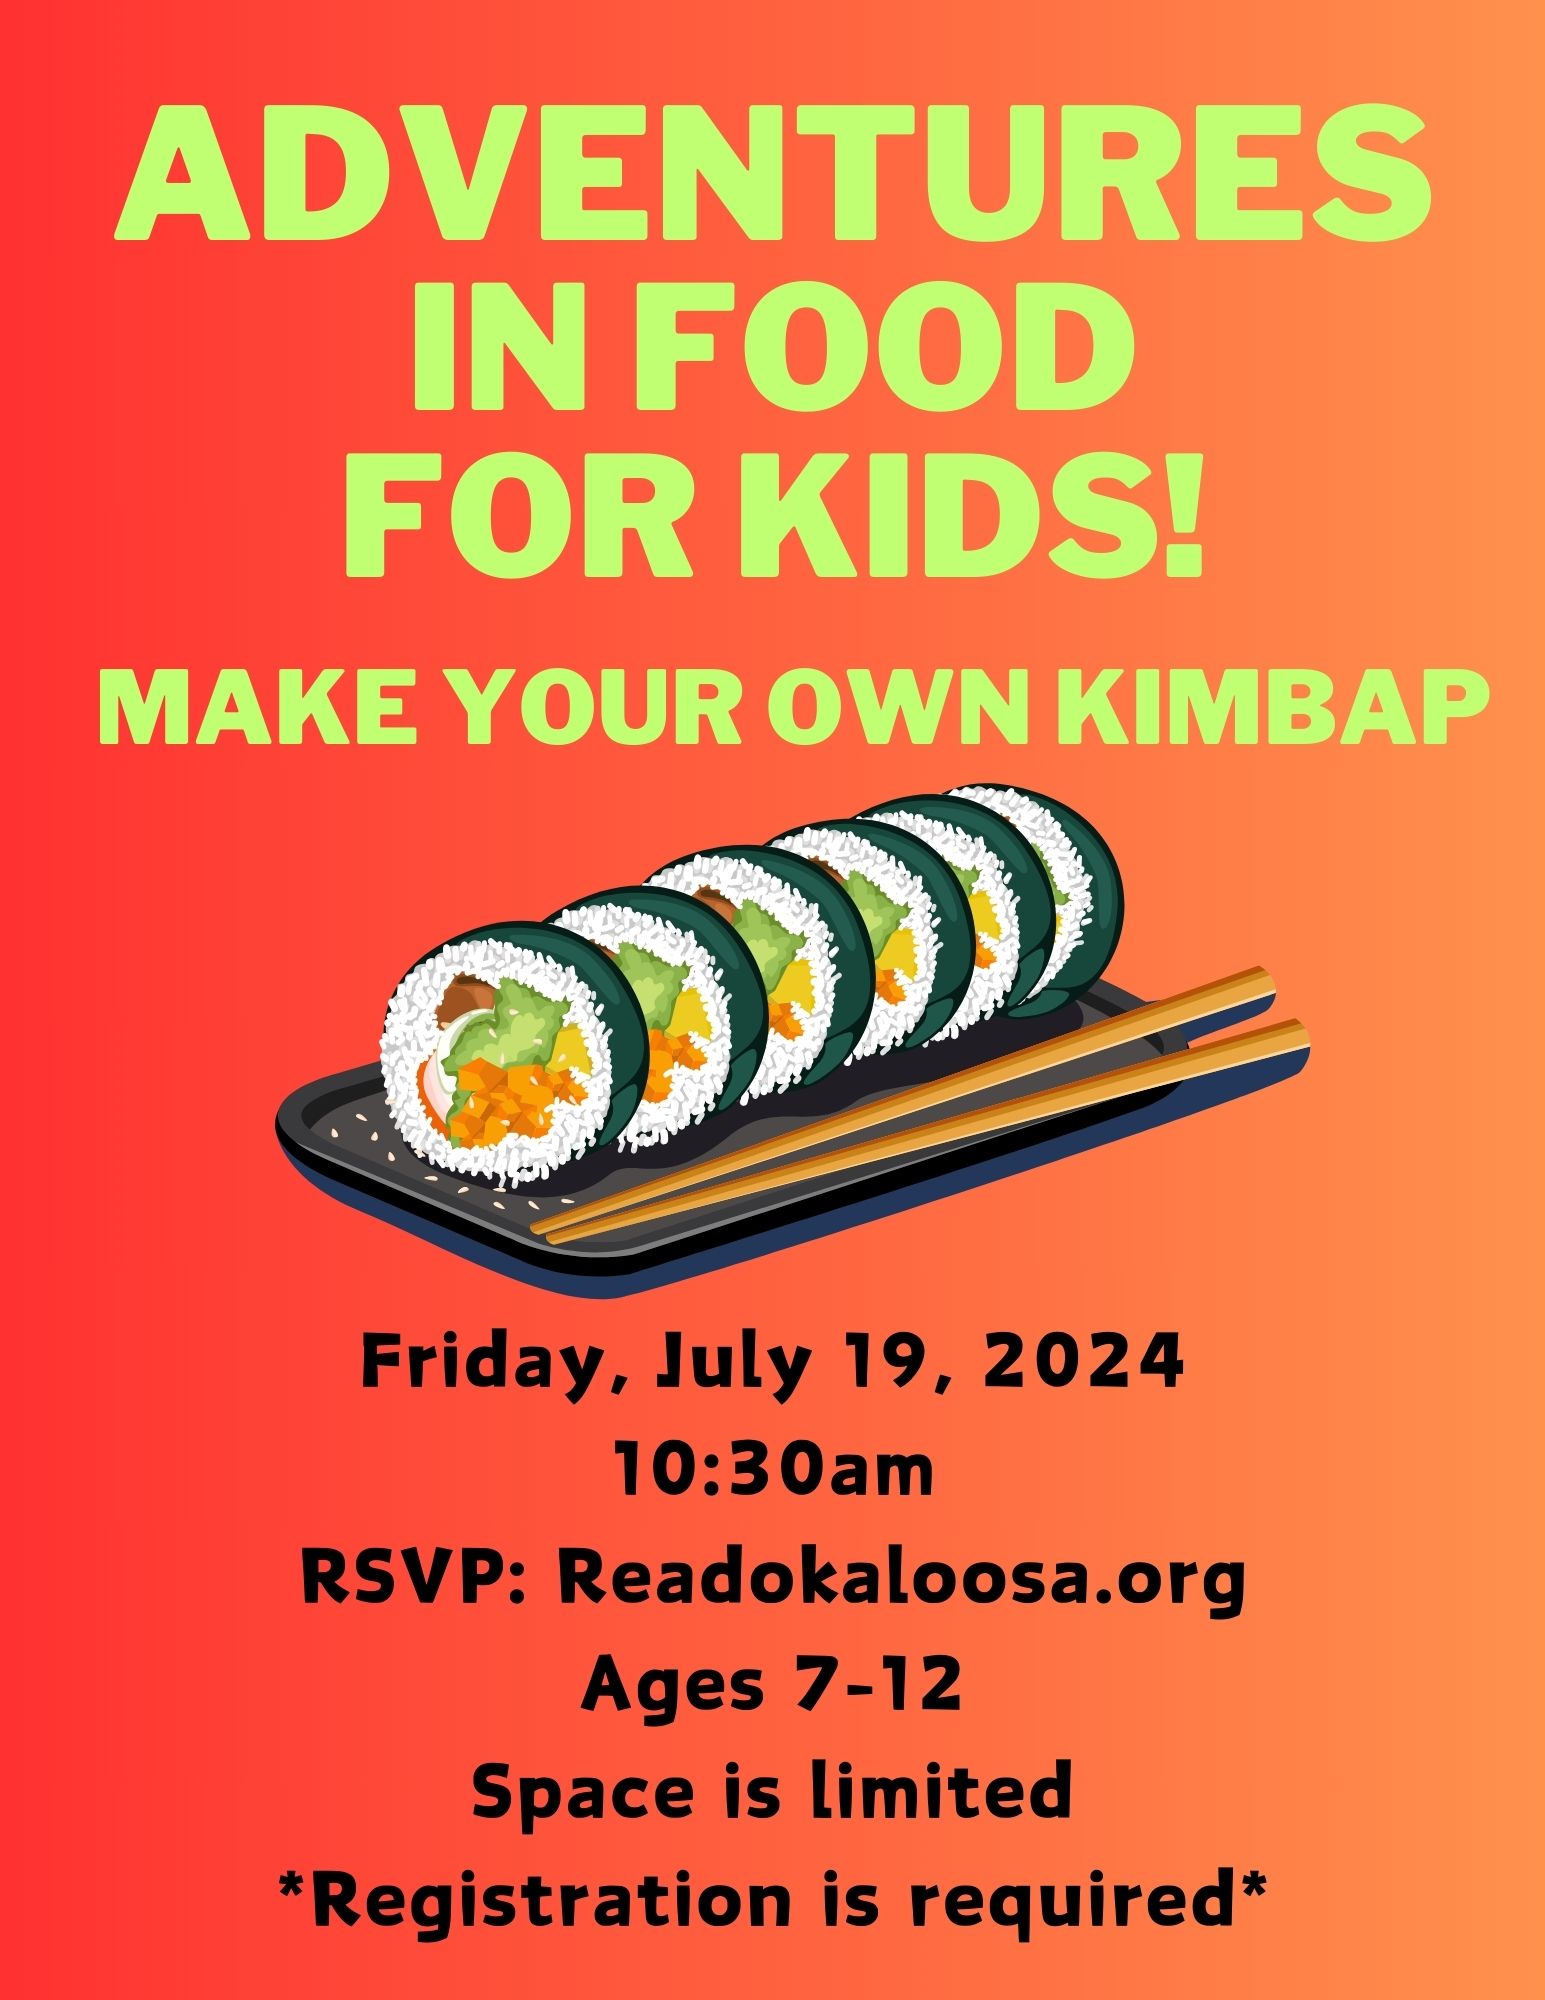 make your own kimbap for kids ages 7-12 friday july 19 @ 10:30am